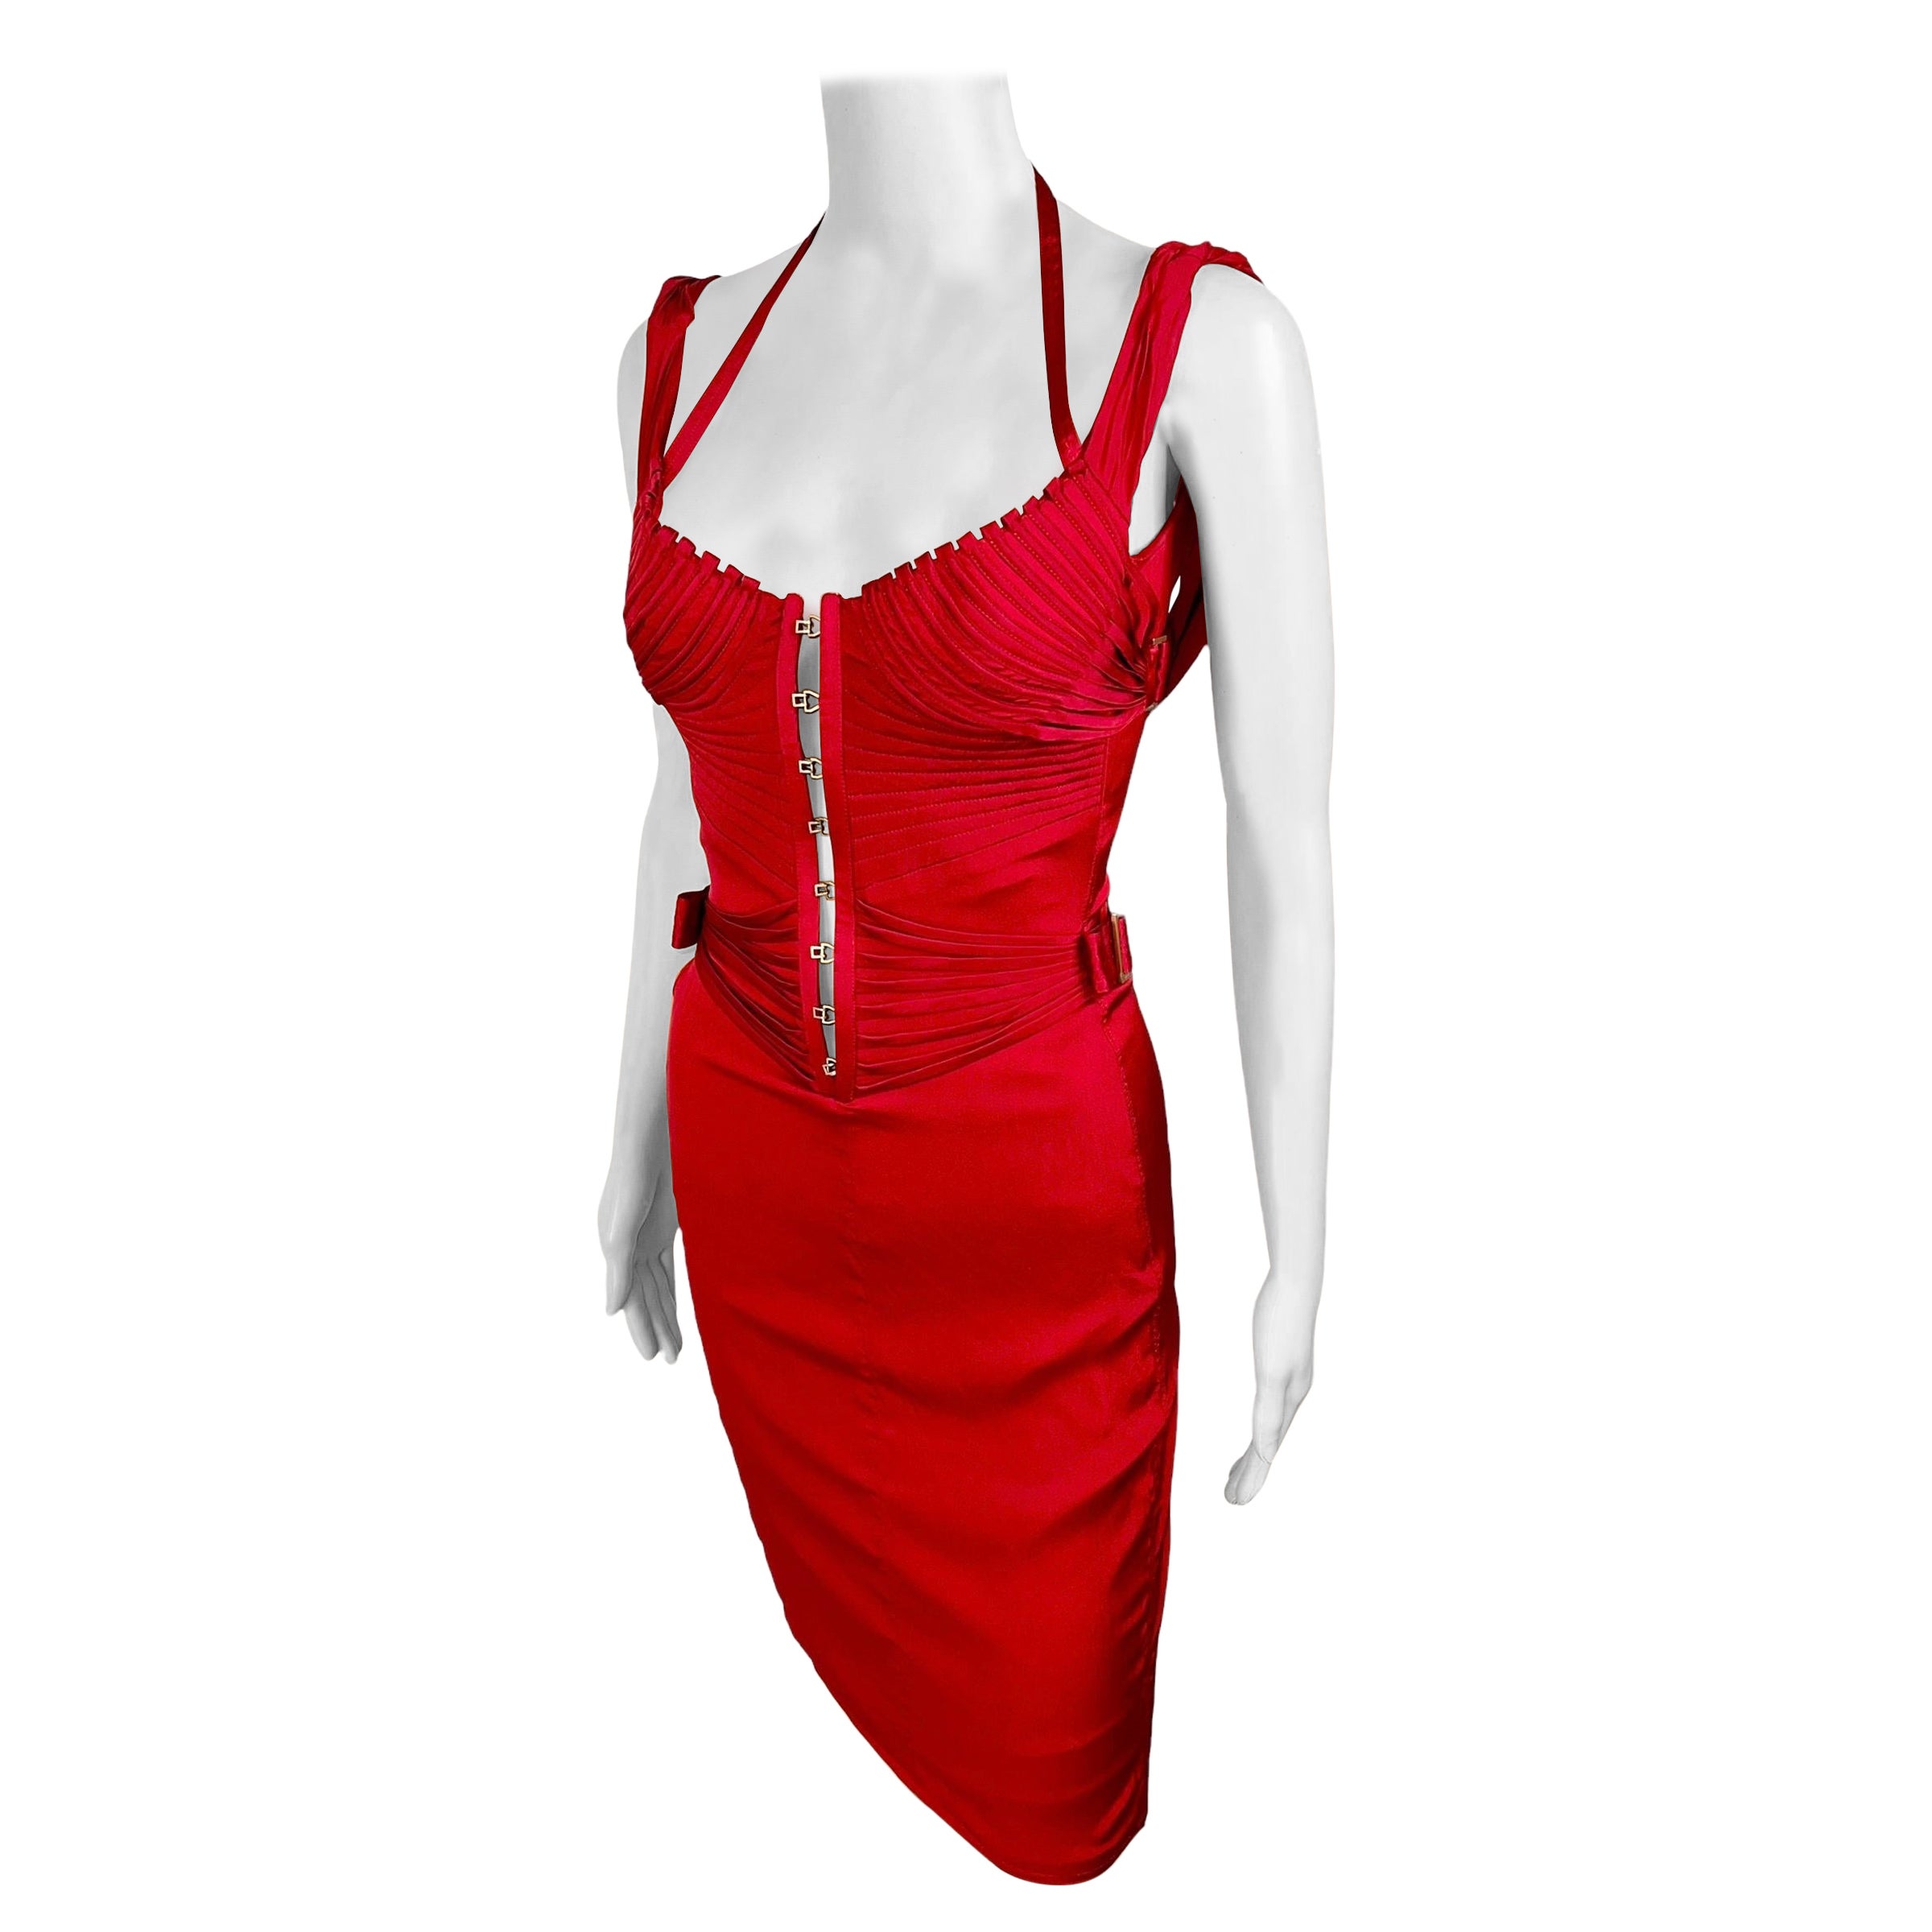 Tom Ford for Gucci F/W 2003 Runway Bustier Corset Silk Red Dress For Sale